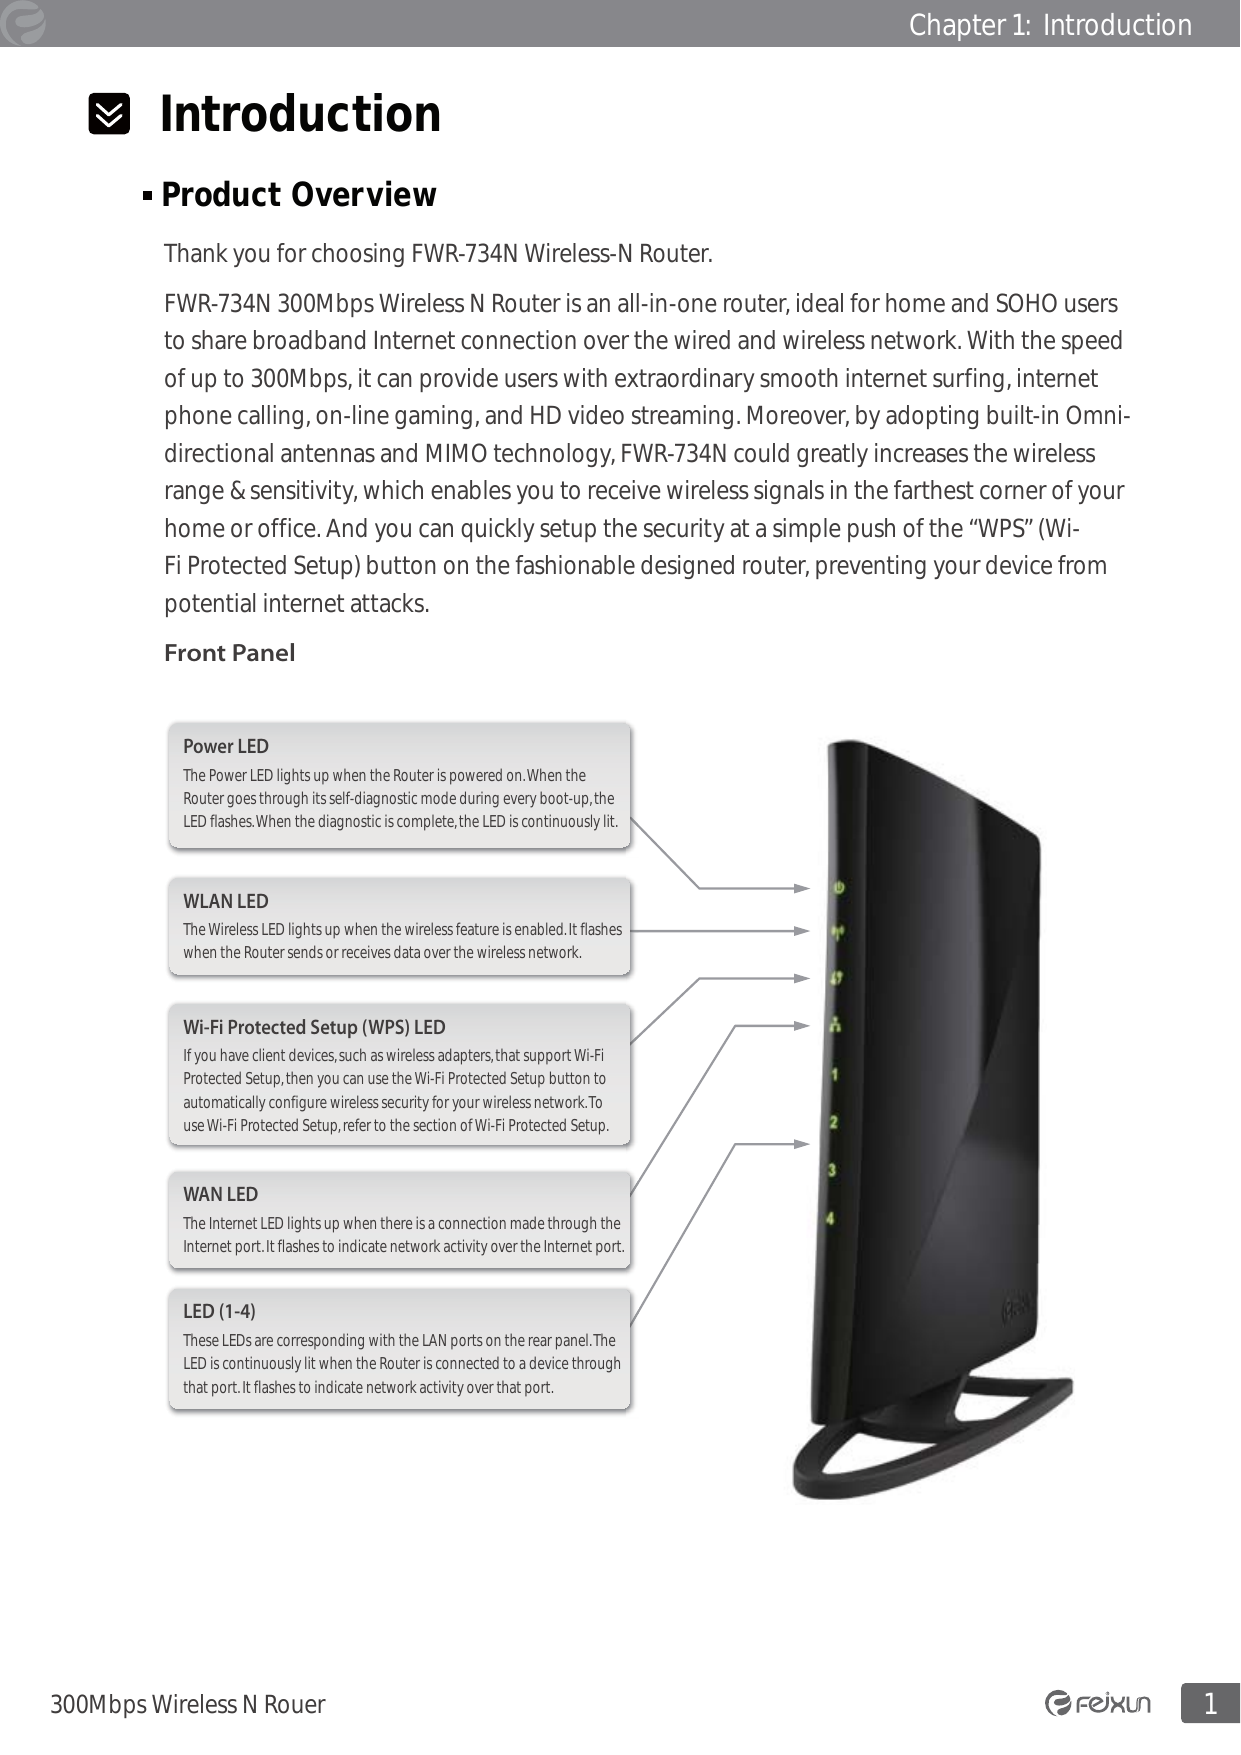 1300Mbps Wireless N RouerChapter 1:  Introduction  Introduction Product Overview                                                                                                  Thank you for choosing FWR-734N Wireless-N Router. FWR-734N 300Mbps Wireless N Router is an all-in-one router, ideal for home and SOHO users to share broadband Internet connection over the wired and wireless network. With the speed of up to 300Mbps, it can provide users with extraordinary smooth internet surfing, internet phone calling, on-line gaming, and HD video streaming. Moreover, by adopting built-in Omni-directional antennas and MIMO technology, FWR-734N could greatly increases the wireless range &amp; sensitivity, which enables you to receive wireless signals in the farthest corner of your home or office. And you can quickly setup the security at a simple push of the “WPS” (Wi-Fi Protected Setup) button on the fashionable designed router, preventing your device from potential internet attacks. Front PanelThe Power LED lights up when the Router is powered on. When the Router goes through its self-diagnostic mode during every boot-up, the LED flashes. When the diagnostic is complete, the LED is continuously lit.Power LEDThe Wireless LED lights up when the wireless feature is enabled. It flashes when the Router sends or receives data over the wireless network.WLAN LEDThe Internet LED lights up when there is a connection made through the Internet port. It flashes to indicate network activity over the Internet port.WAN LEDThese LEDs are corresponding with the LAN ports on the rear panel. The LED is continuously lit when the Router is connected to a device through that port. It flashes to indicate network activity over that port.LED (1-4)If you have client devices, such as wireless adapters, that support Wi-Fi Protected Setup, then you can use the Wi-Fi Protected Setup button to automatically configure wireless security for your wireless network. To use Wi-Fi Protected Setup, refer to the section of Wi-Fi Protected Setup.Wi-Fi Protected Setup (WPS) LED